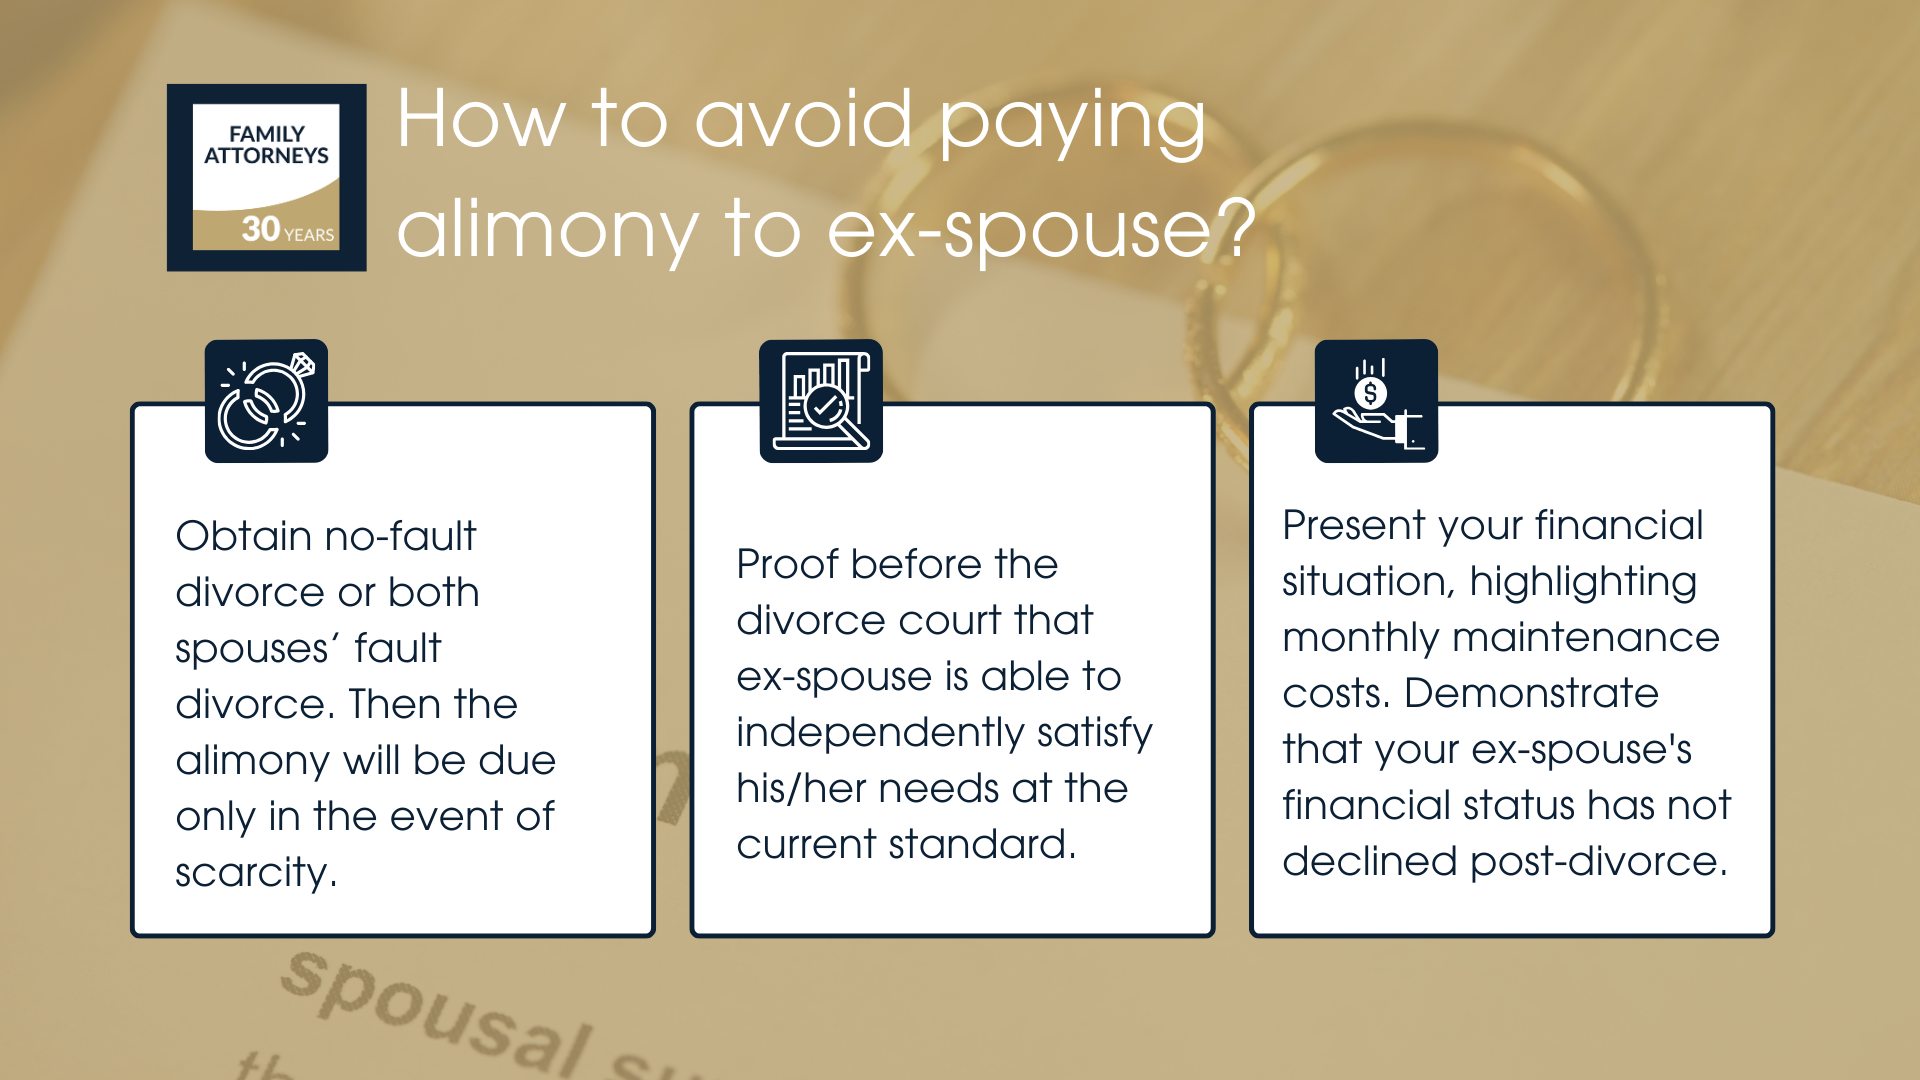 How to avoid paying alimony to ex-spouse?